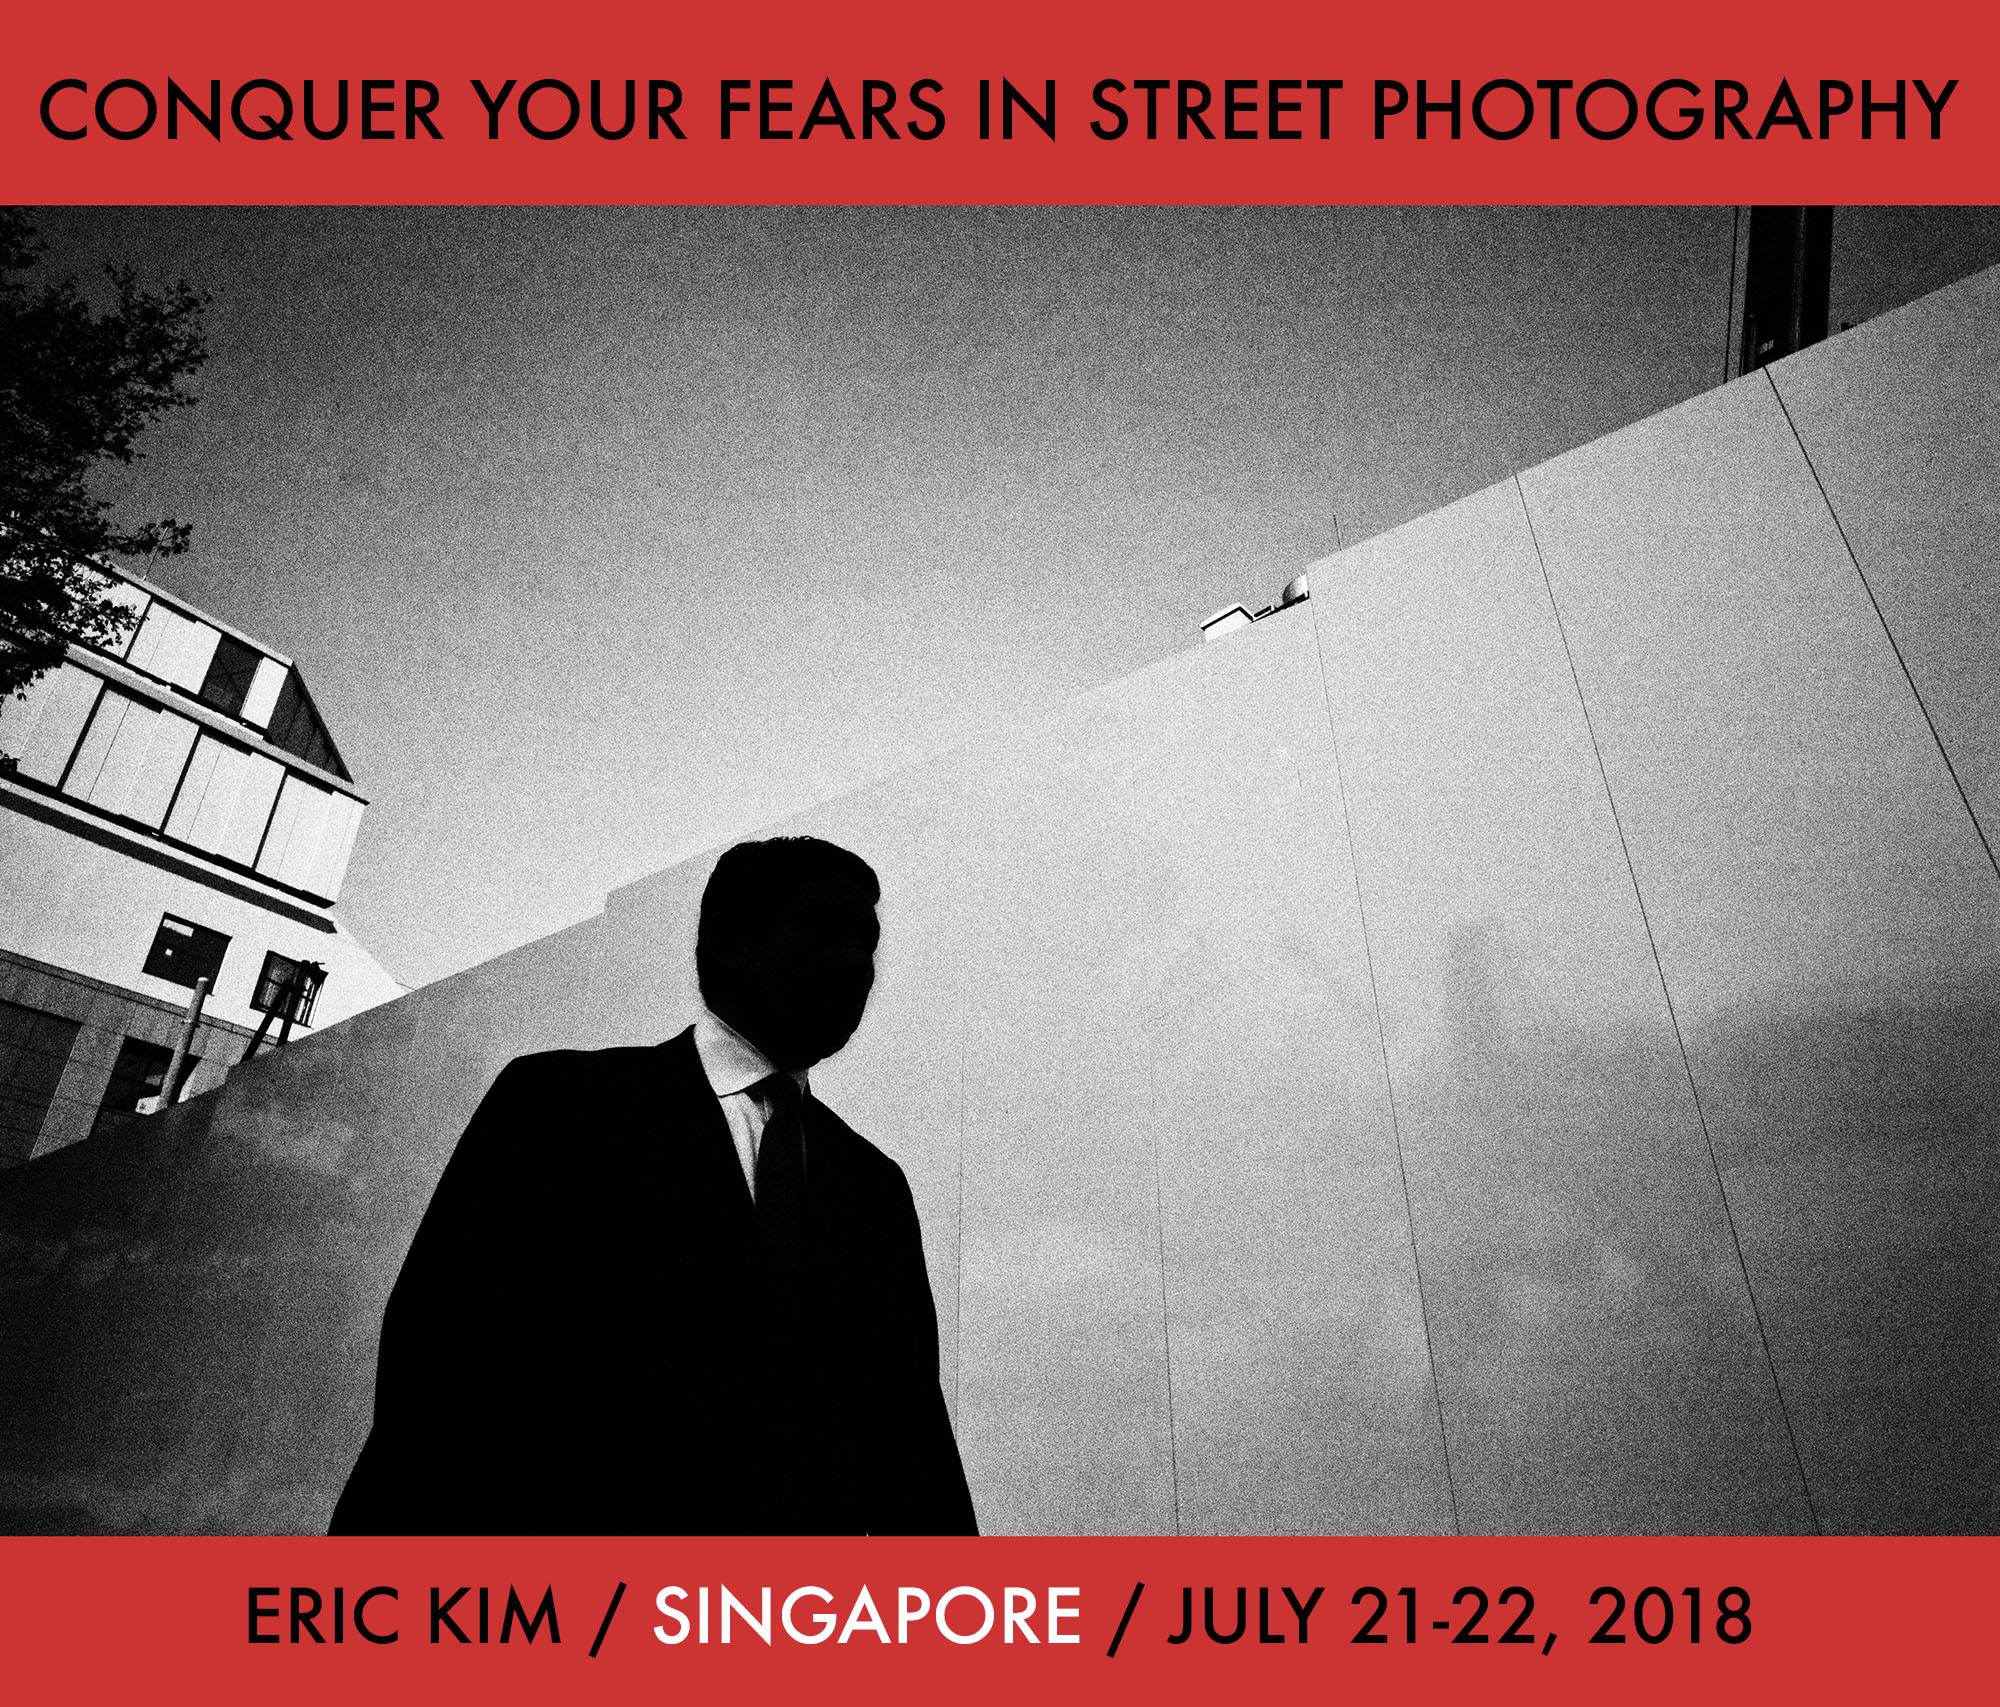 Singapore Conquer Your Fears in Street Photography Workshop (July 21-22, 2018)